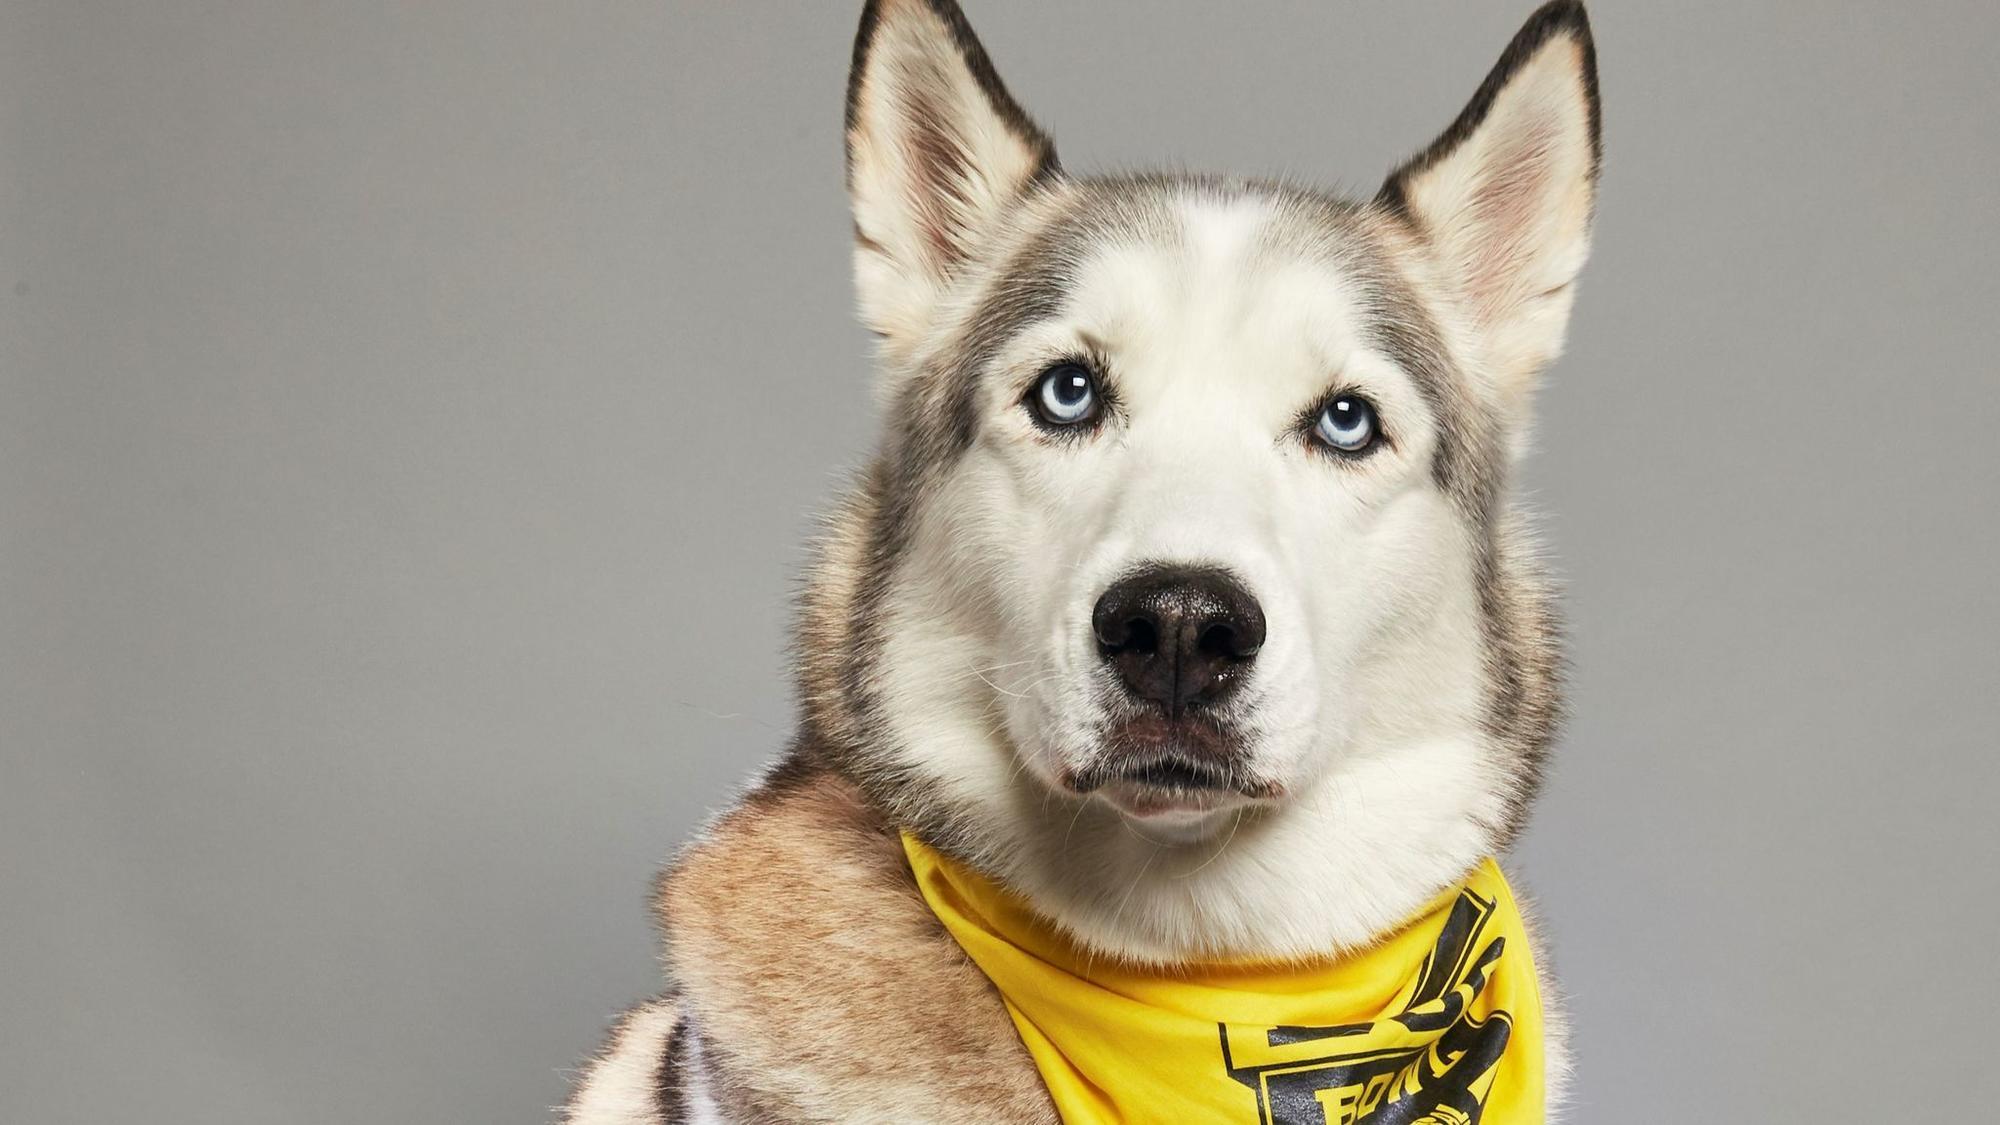 Nanook was once a Siberian Husky in peril. Now, he's about to play doggie football on ...2000 x 1125